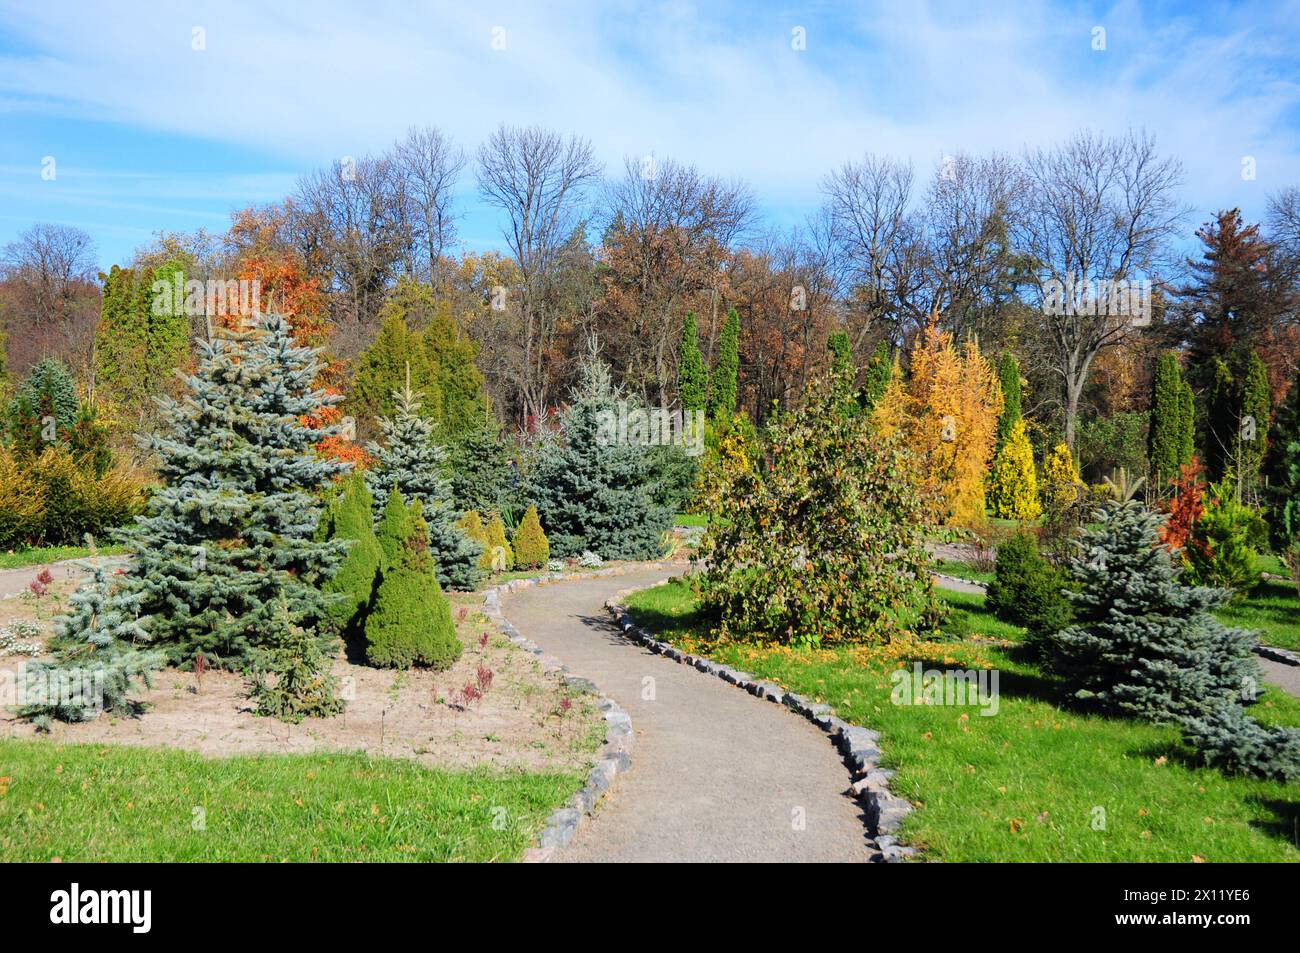 Beautiful landscape design with beautiful path, yews, thuja, picea glauca conica, blue spruce in colorful autumn. Stock Photo